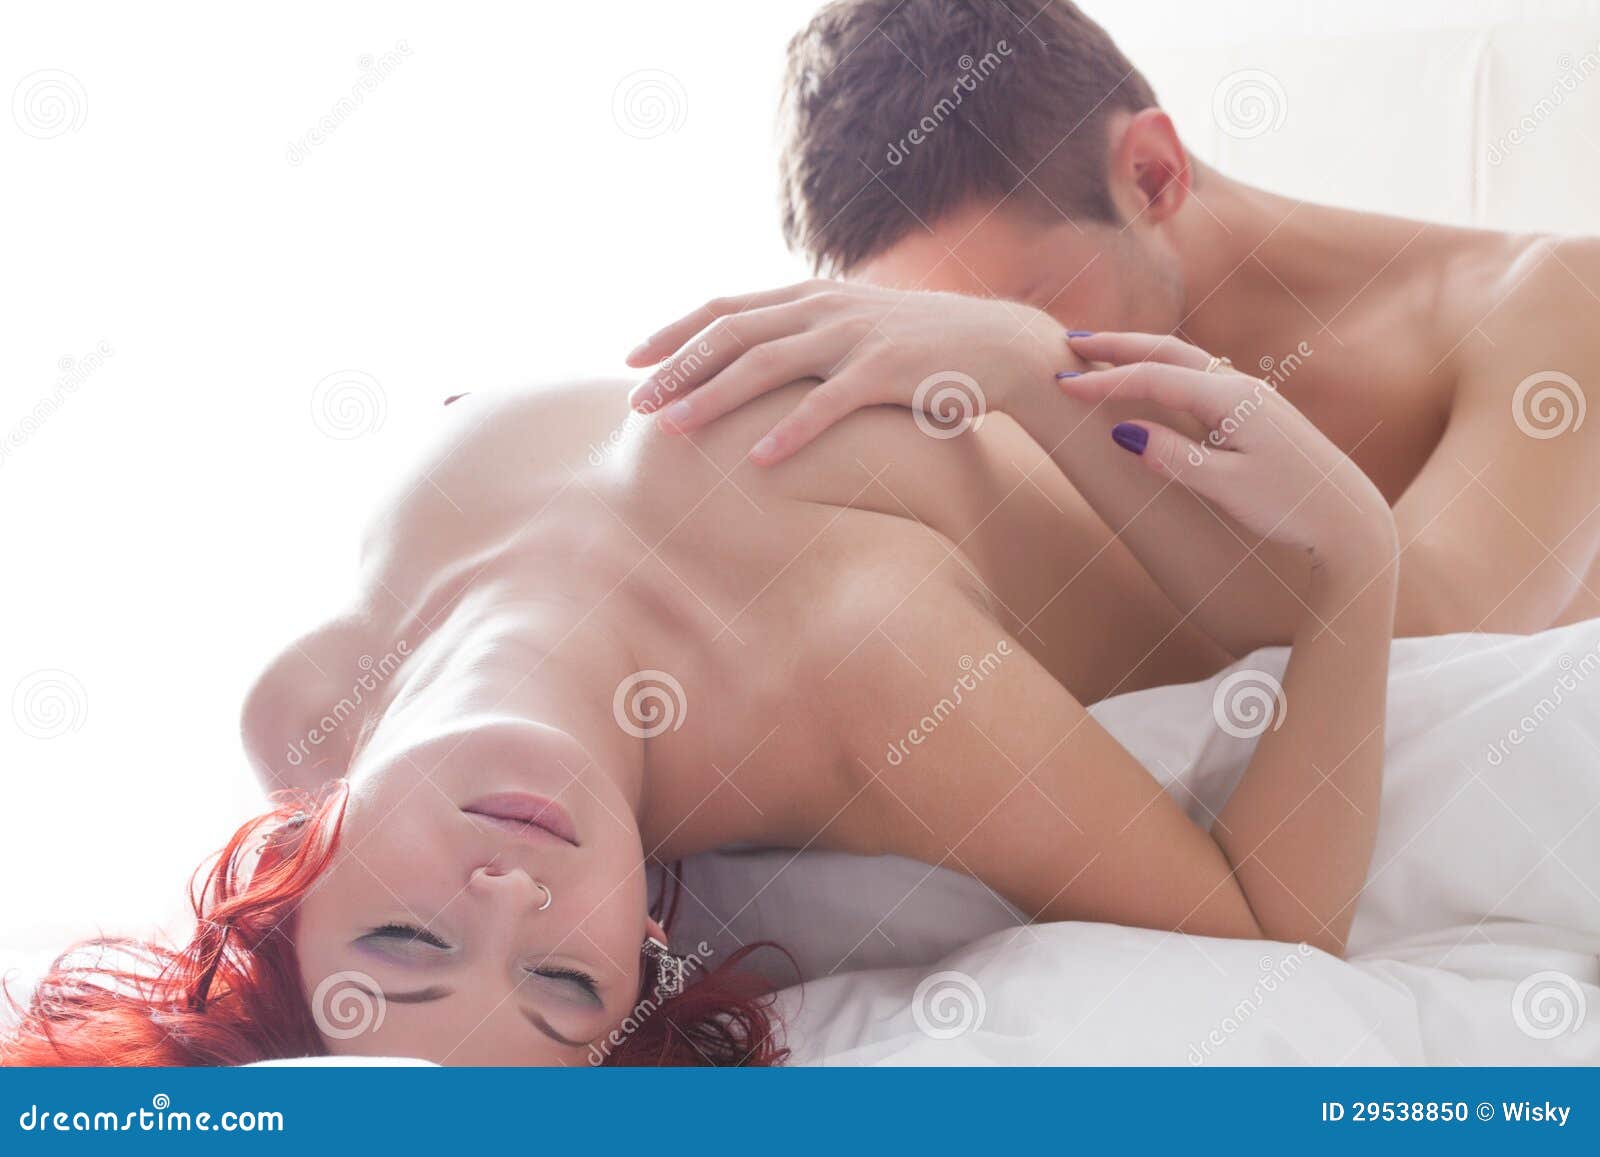 Nude Couple During Sexuality Pics